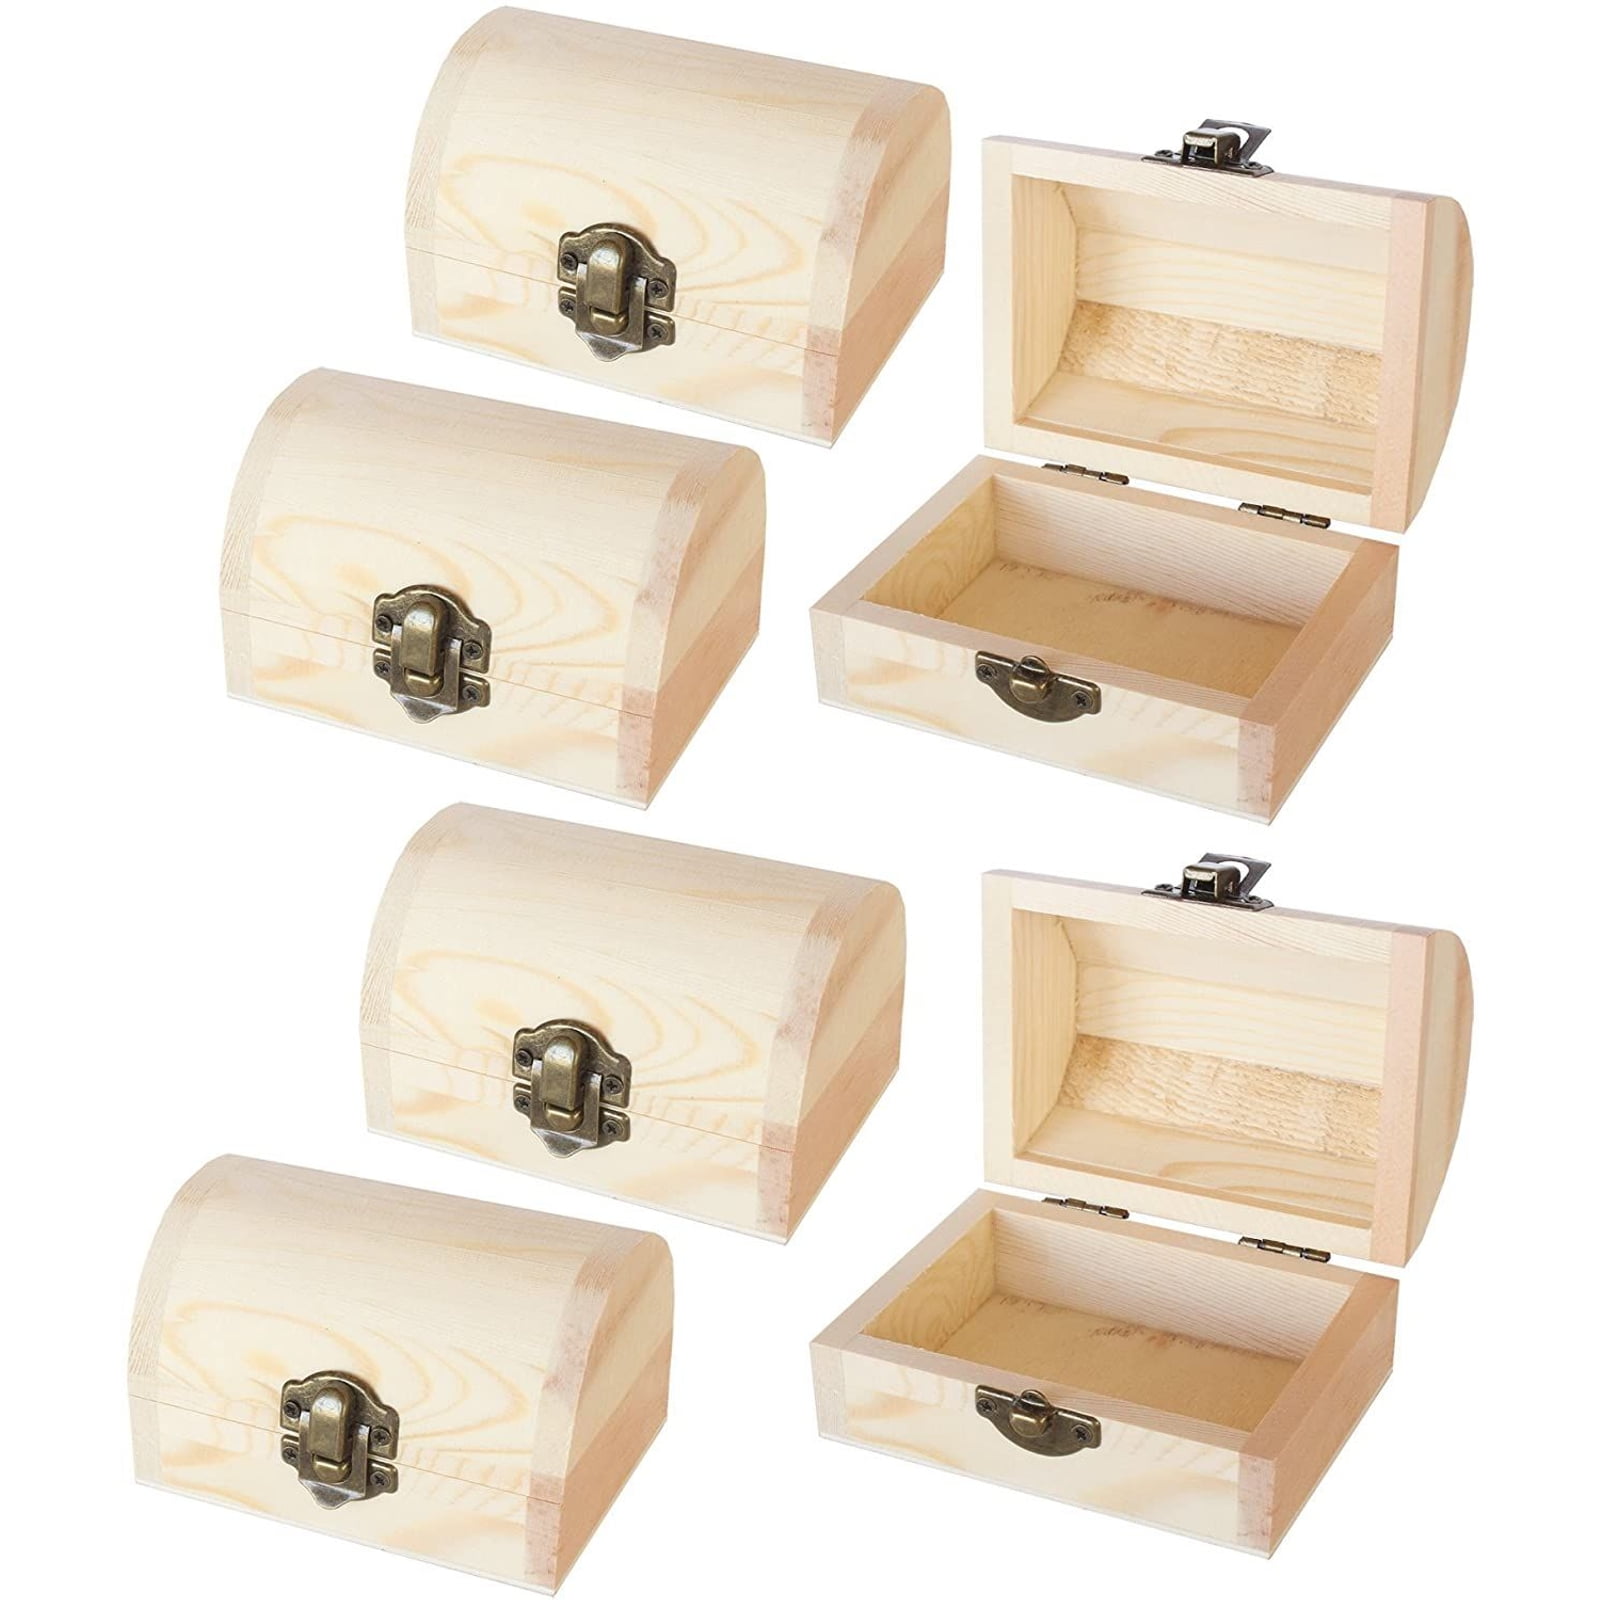 case of 240 Medium Wooden Cheese Boxes 